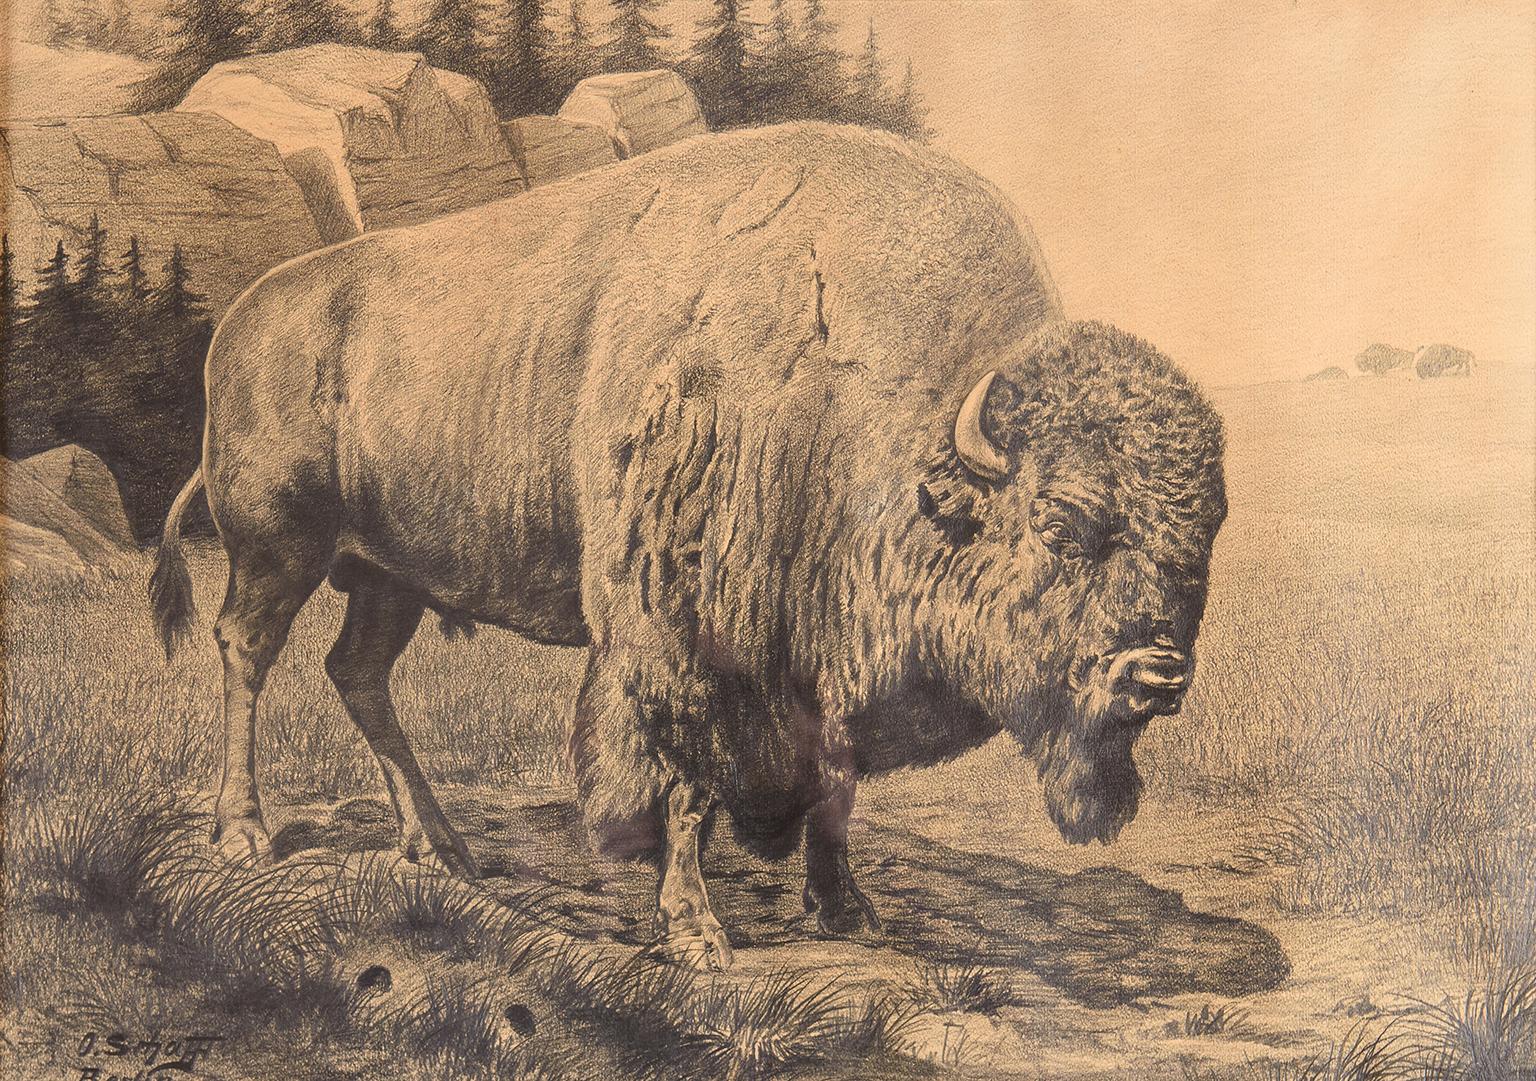 Bison in a landscape, pencil drawing in original wood frame, signed and inscribed 'O.Schafft / Berlin.' Original exhibition labels attached verso show that this work was exhibited in the Grosse Berlin Kunstausstellung 1905, 1033a. 

Dimensions are